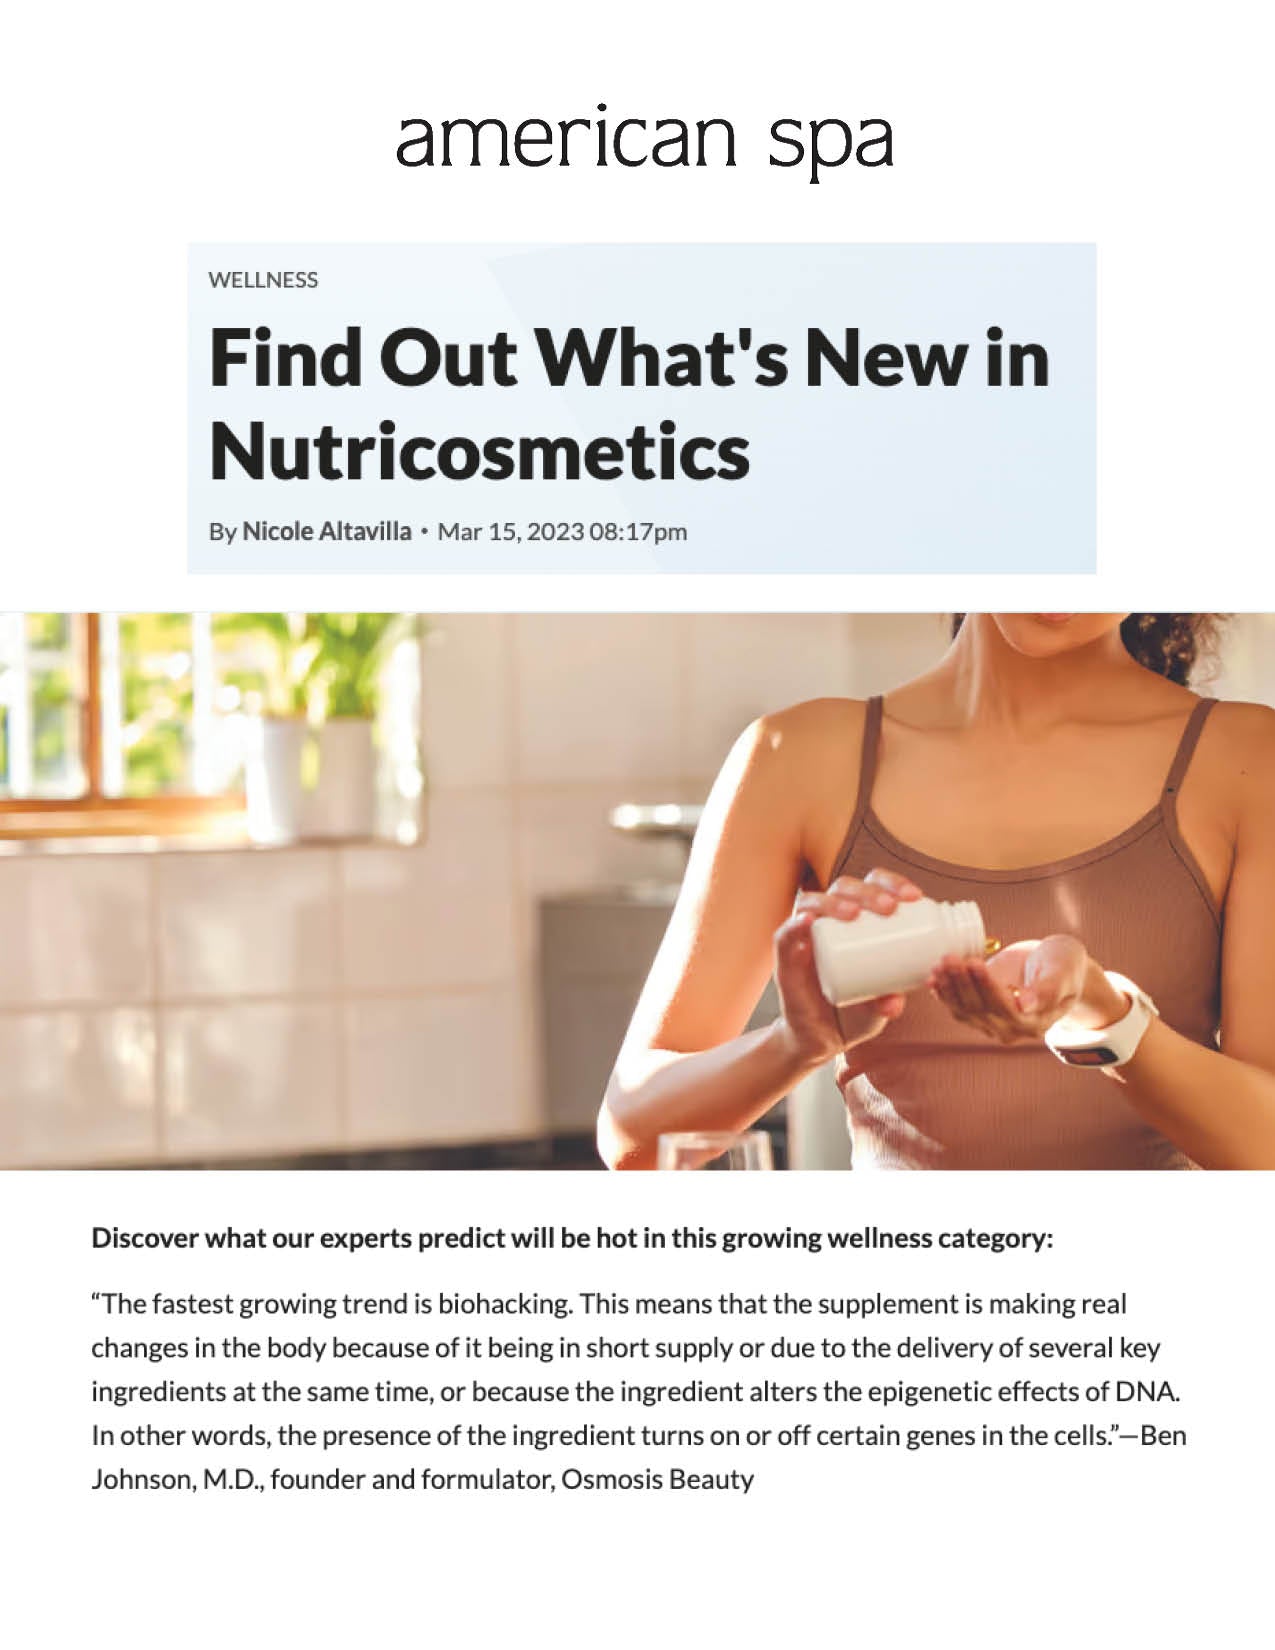 Dr Ben Johnson was interviewed about nutricosmetics by American Spa